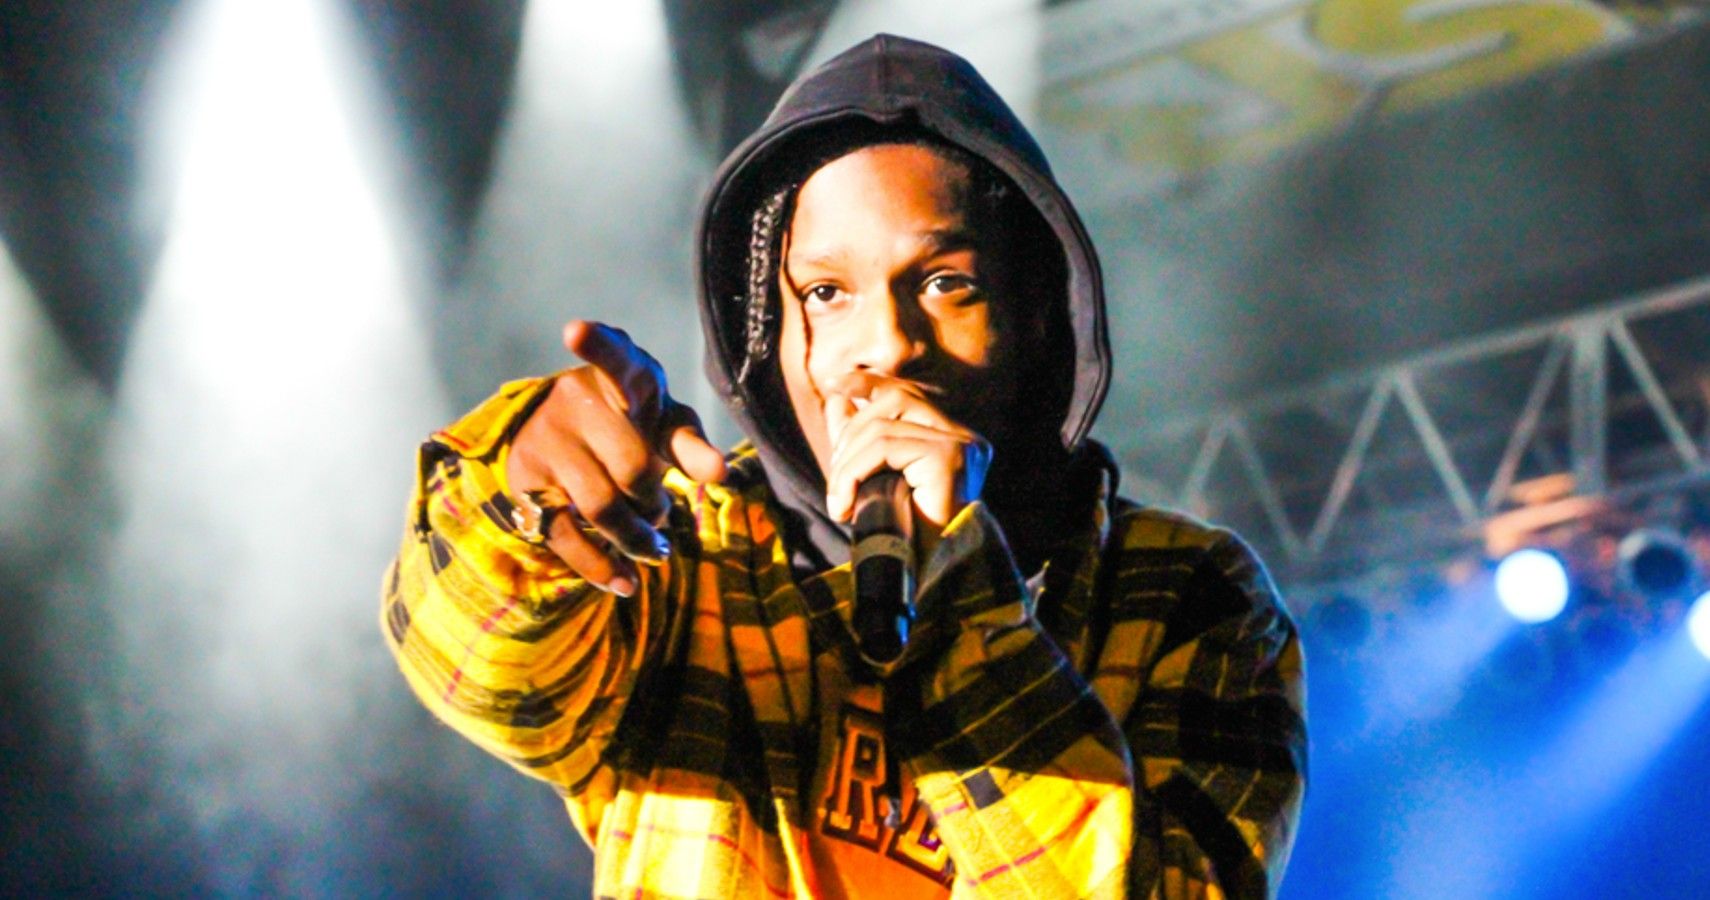 ASAP Rocky in yellow plaid jacket with microphone